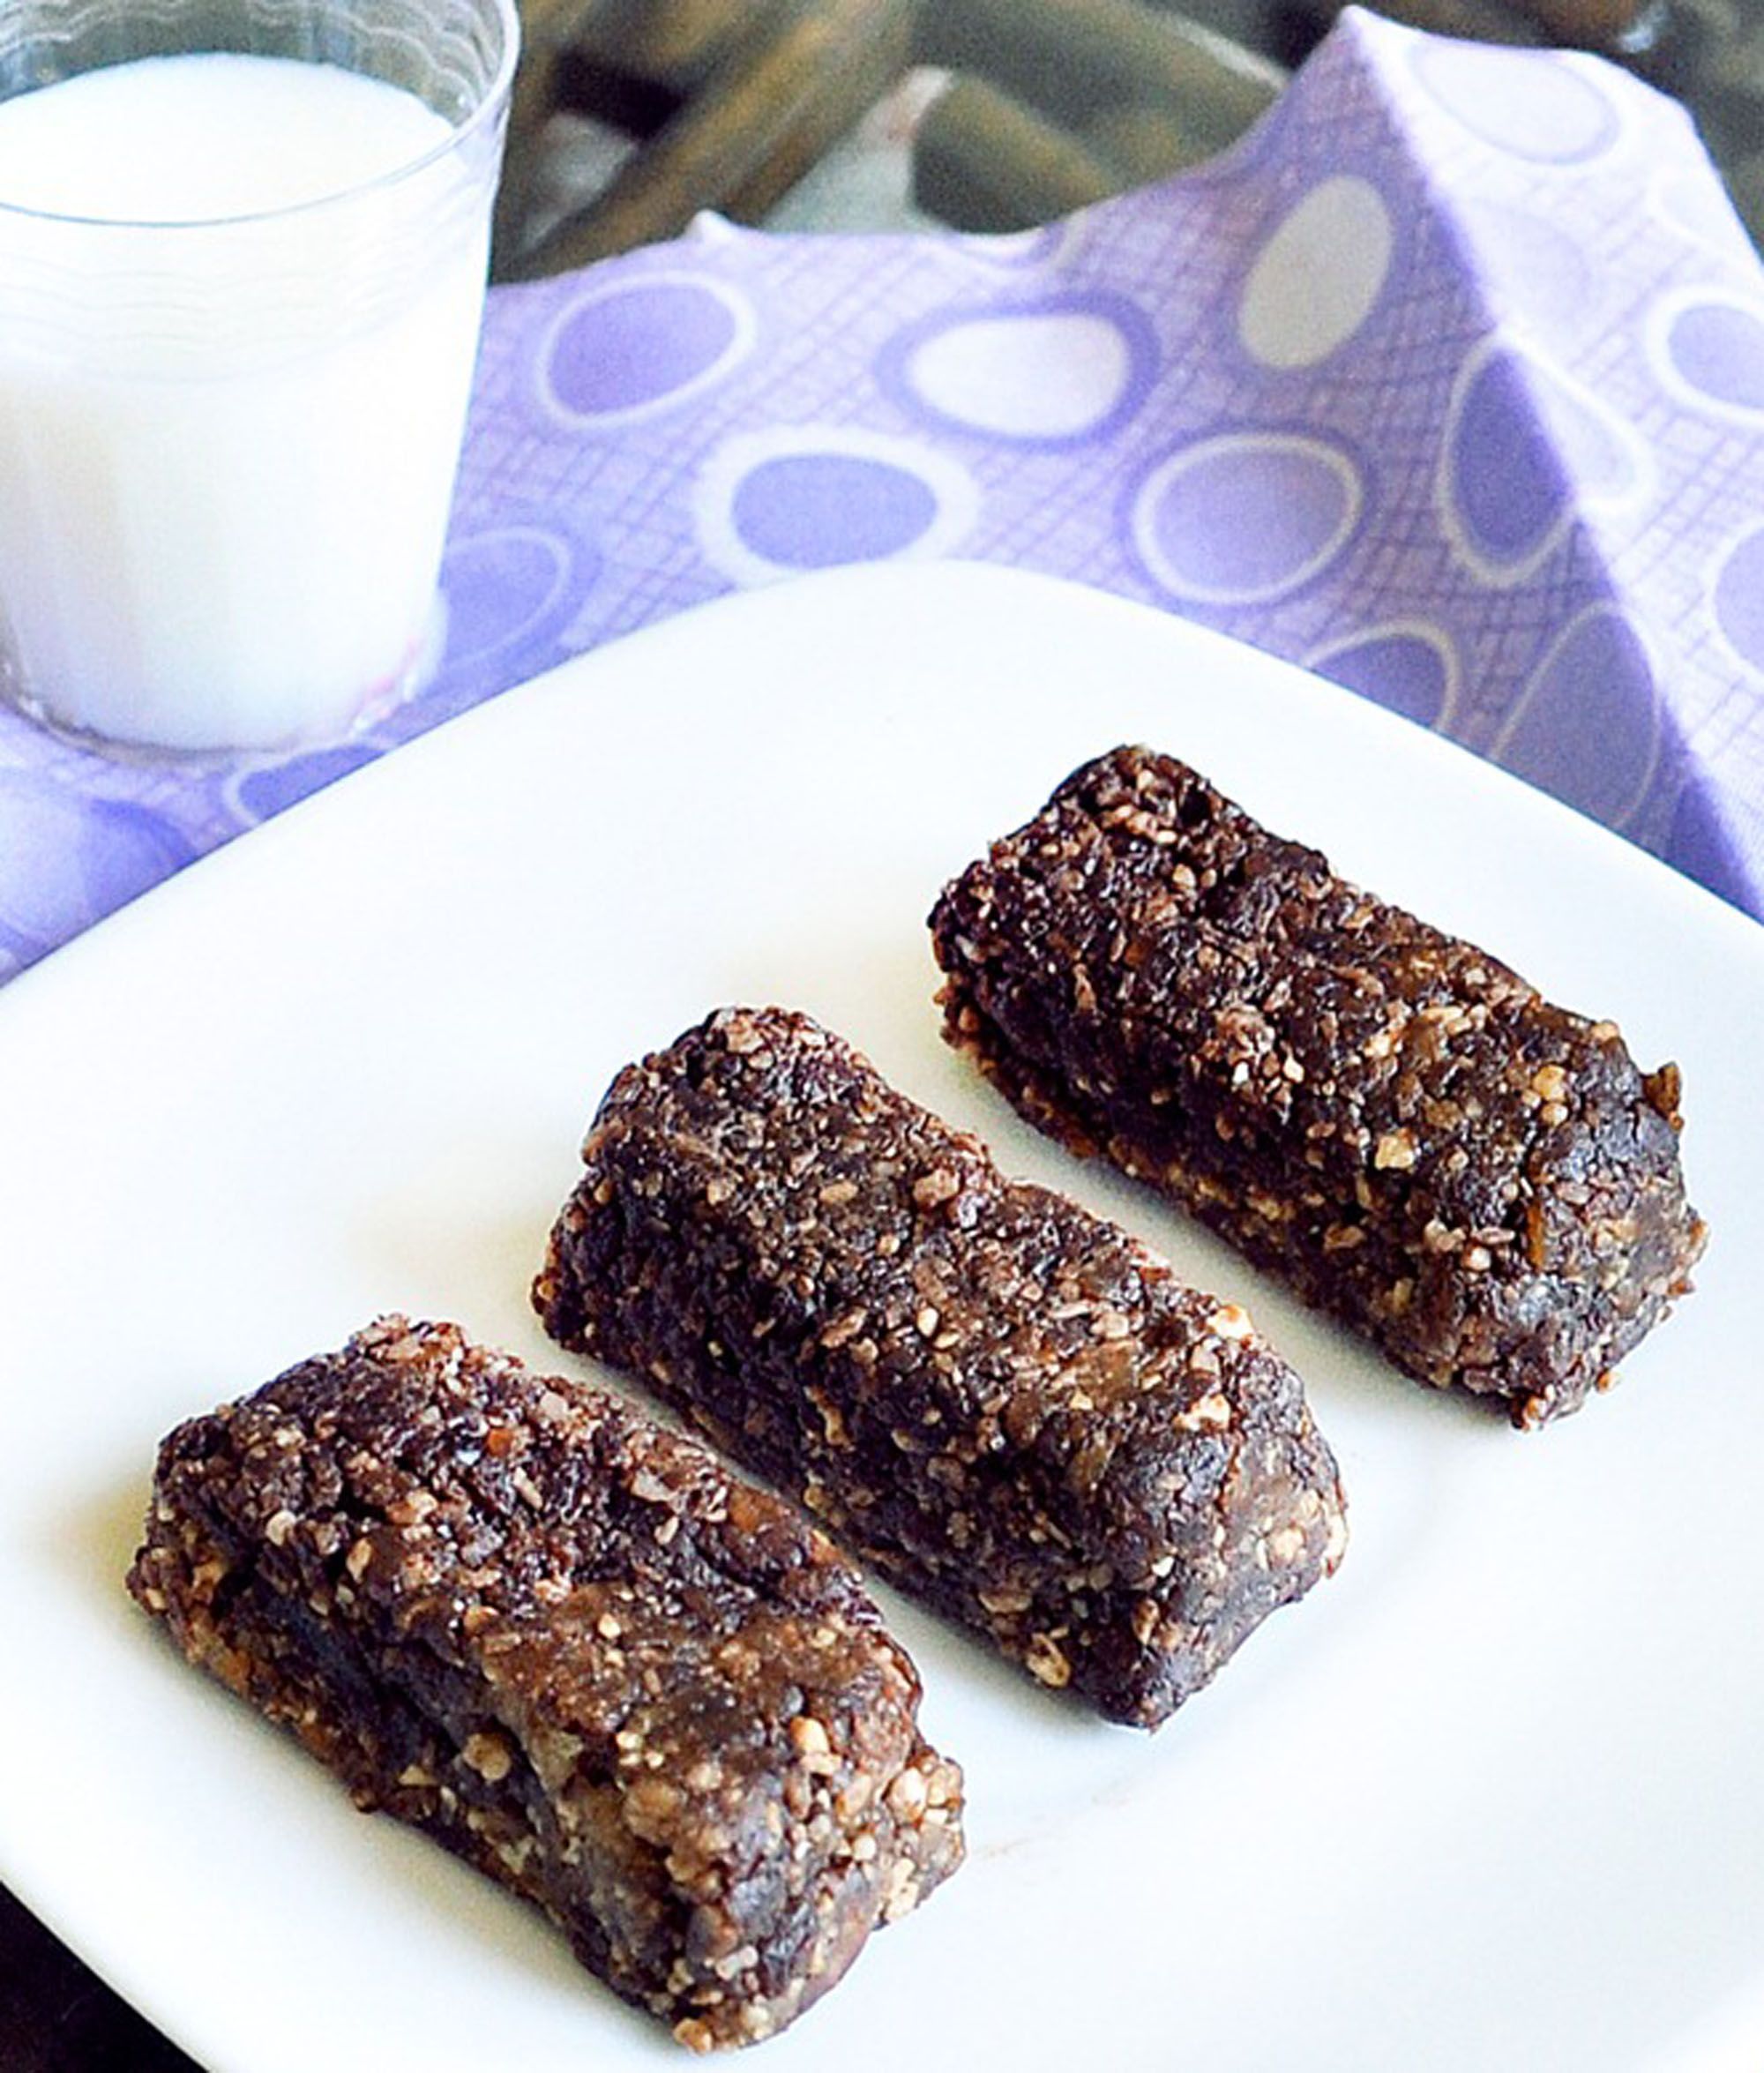 These Homemade Chocolate Larabars taste SO much better than the real ones!